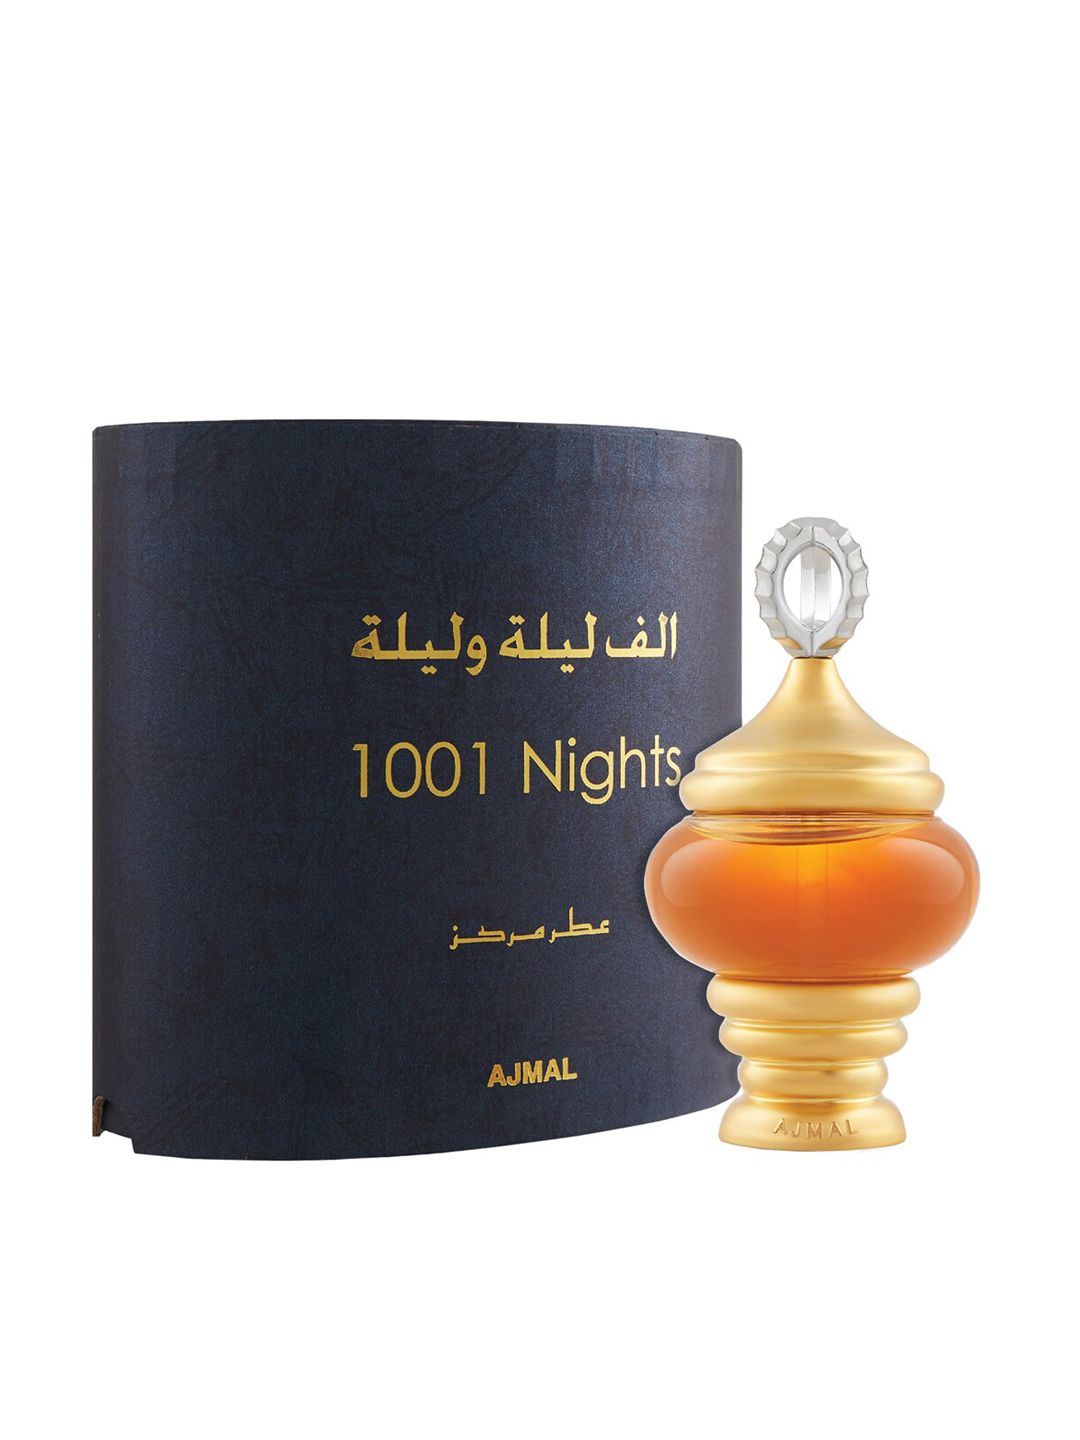 Ajmal 1001 Nights Concentrated Perfume - 30ml Price in India